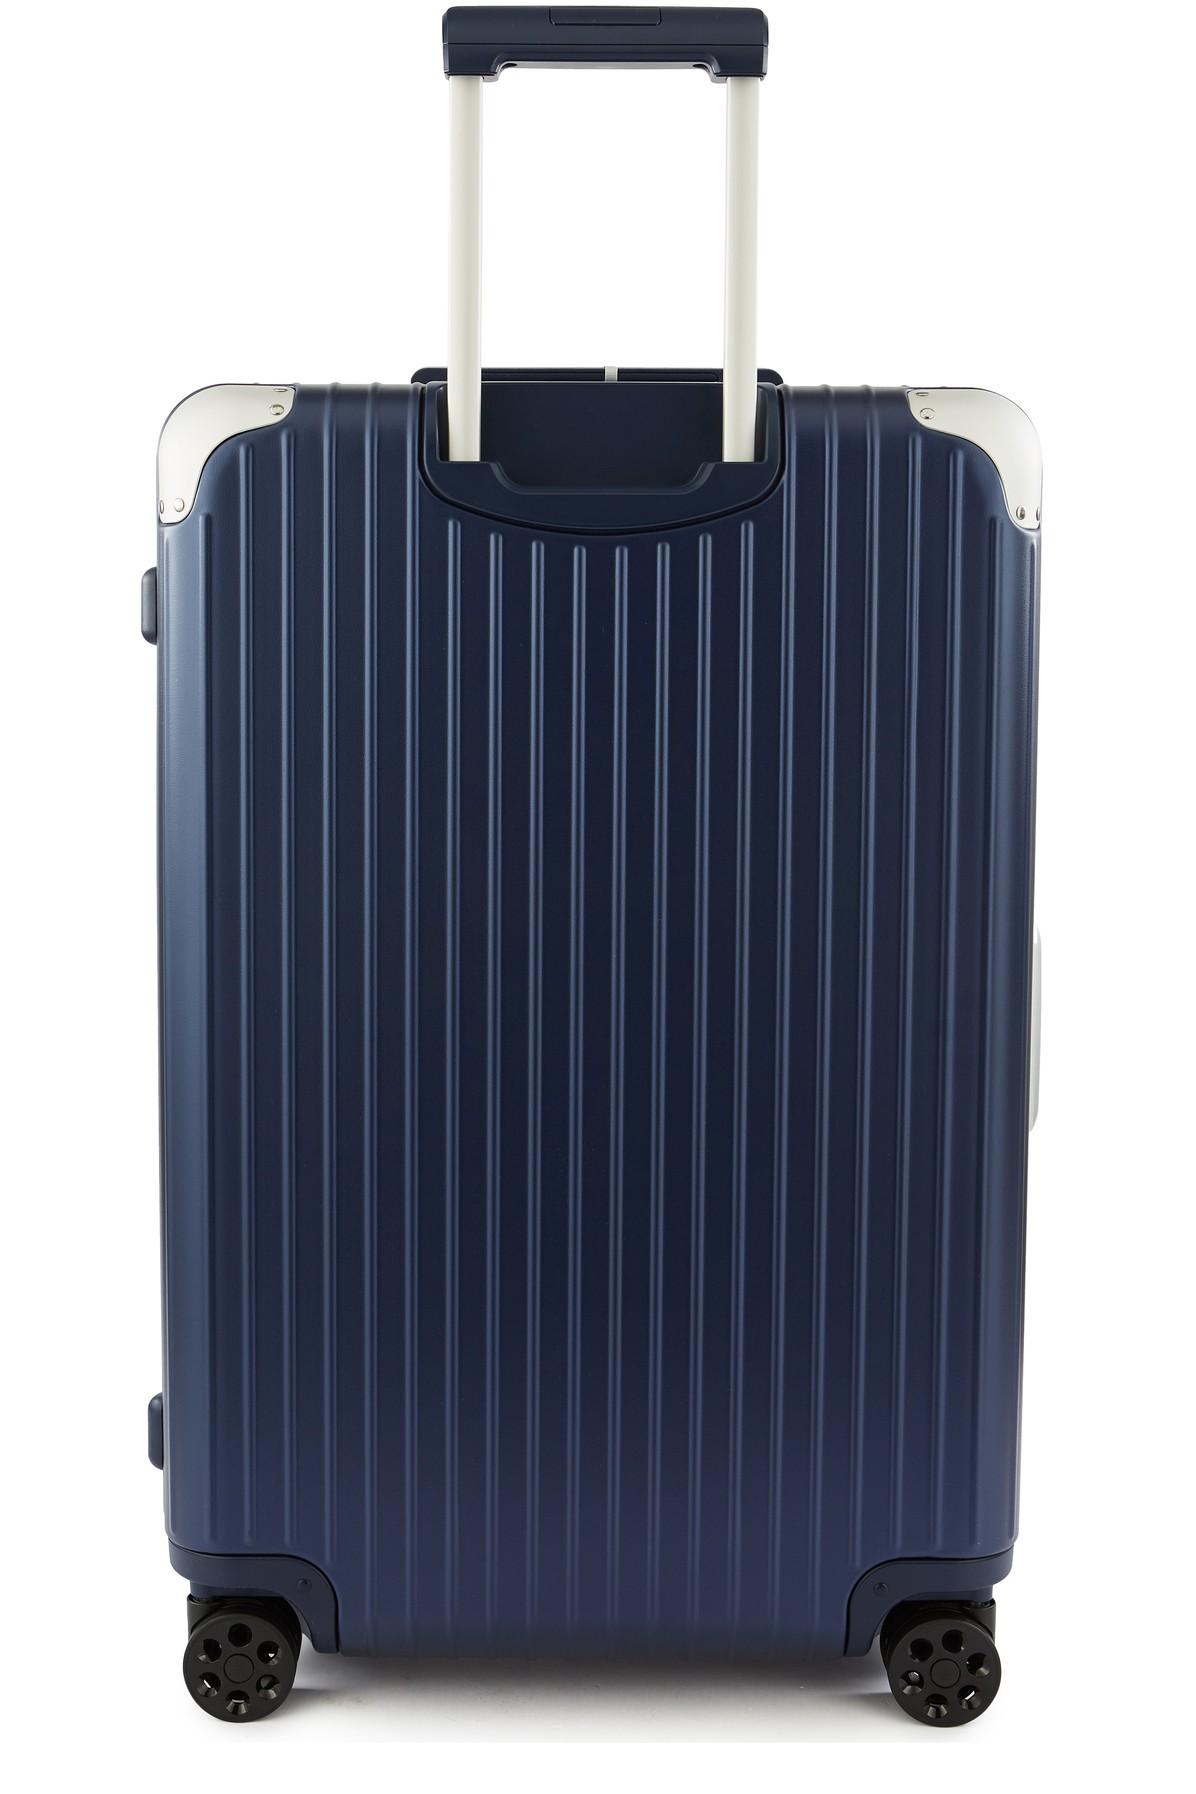 RIMOWA Hybrid Check-in M luggage in Blue for Men - Lyst